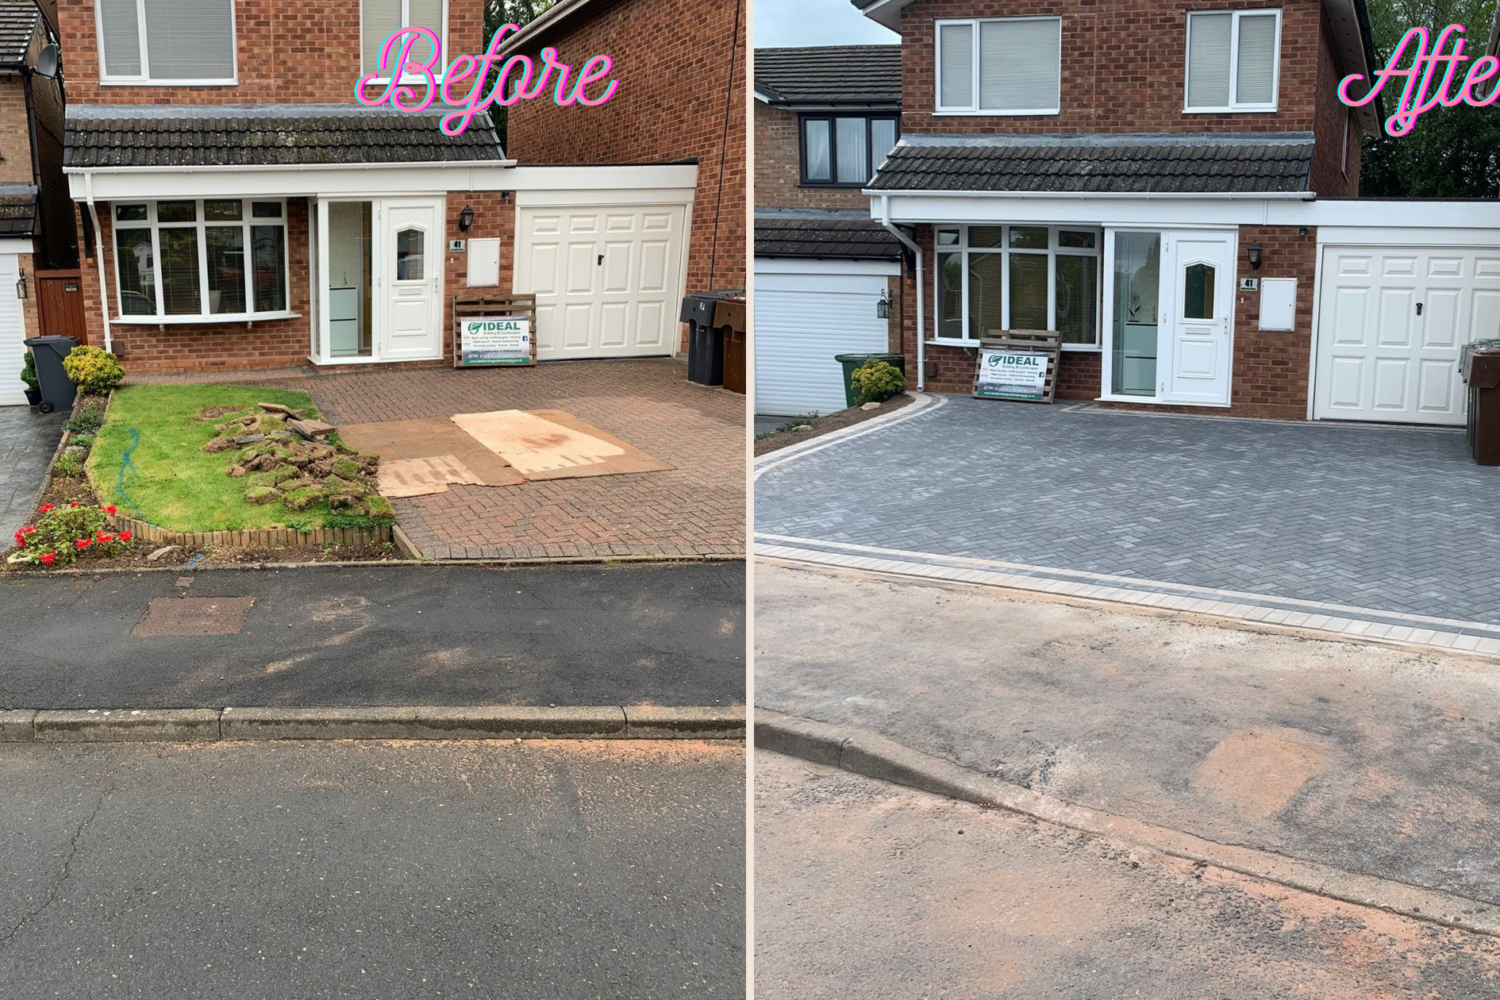 Driveway extension